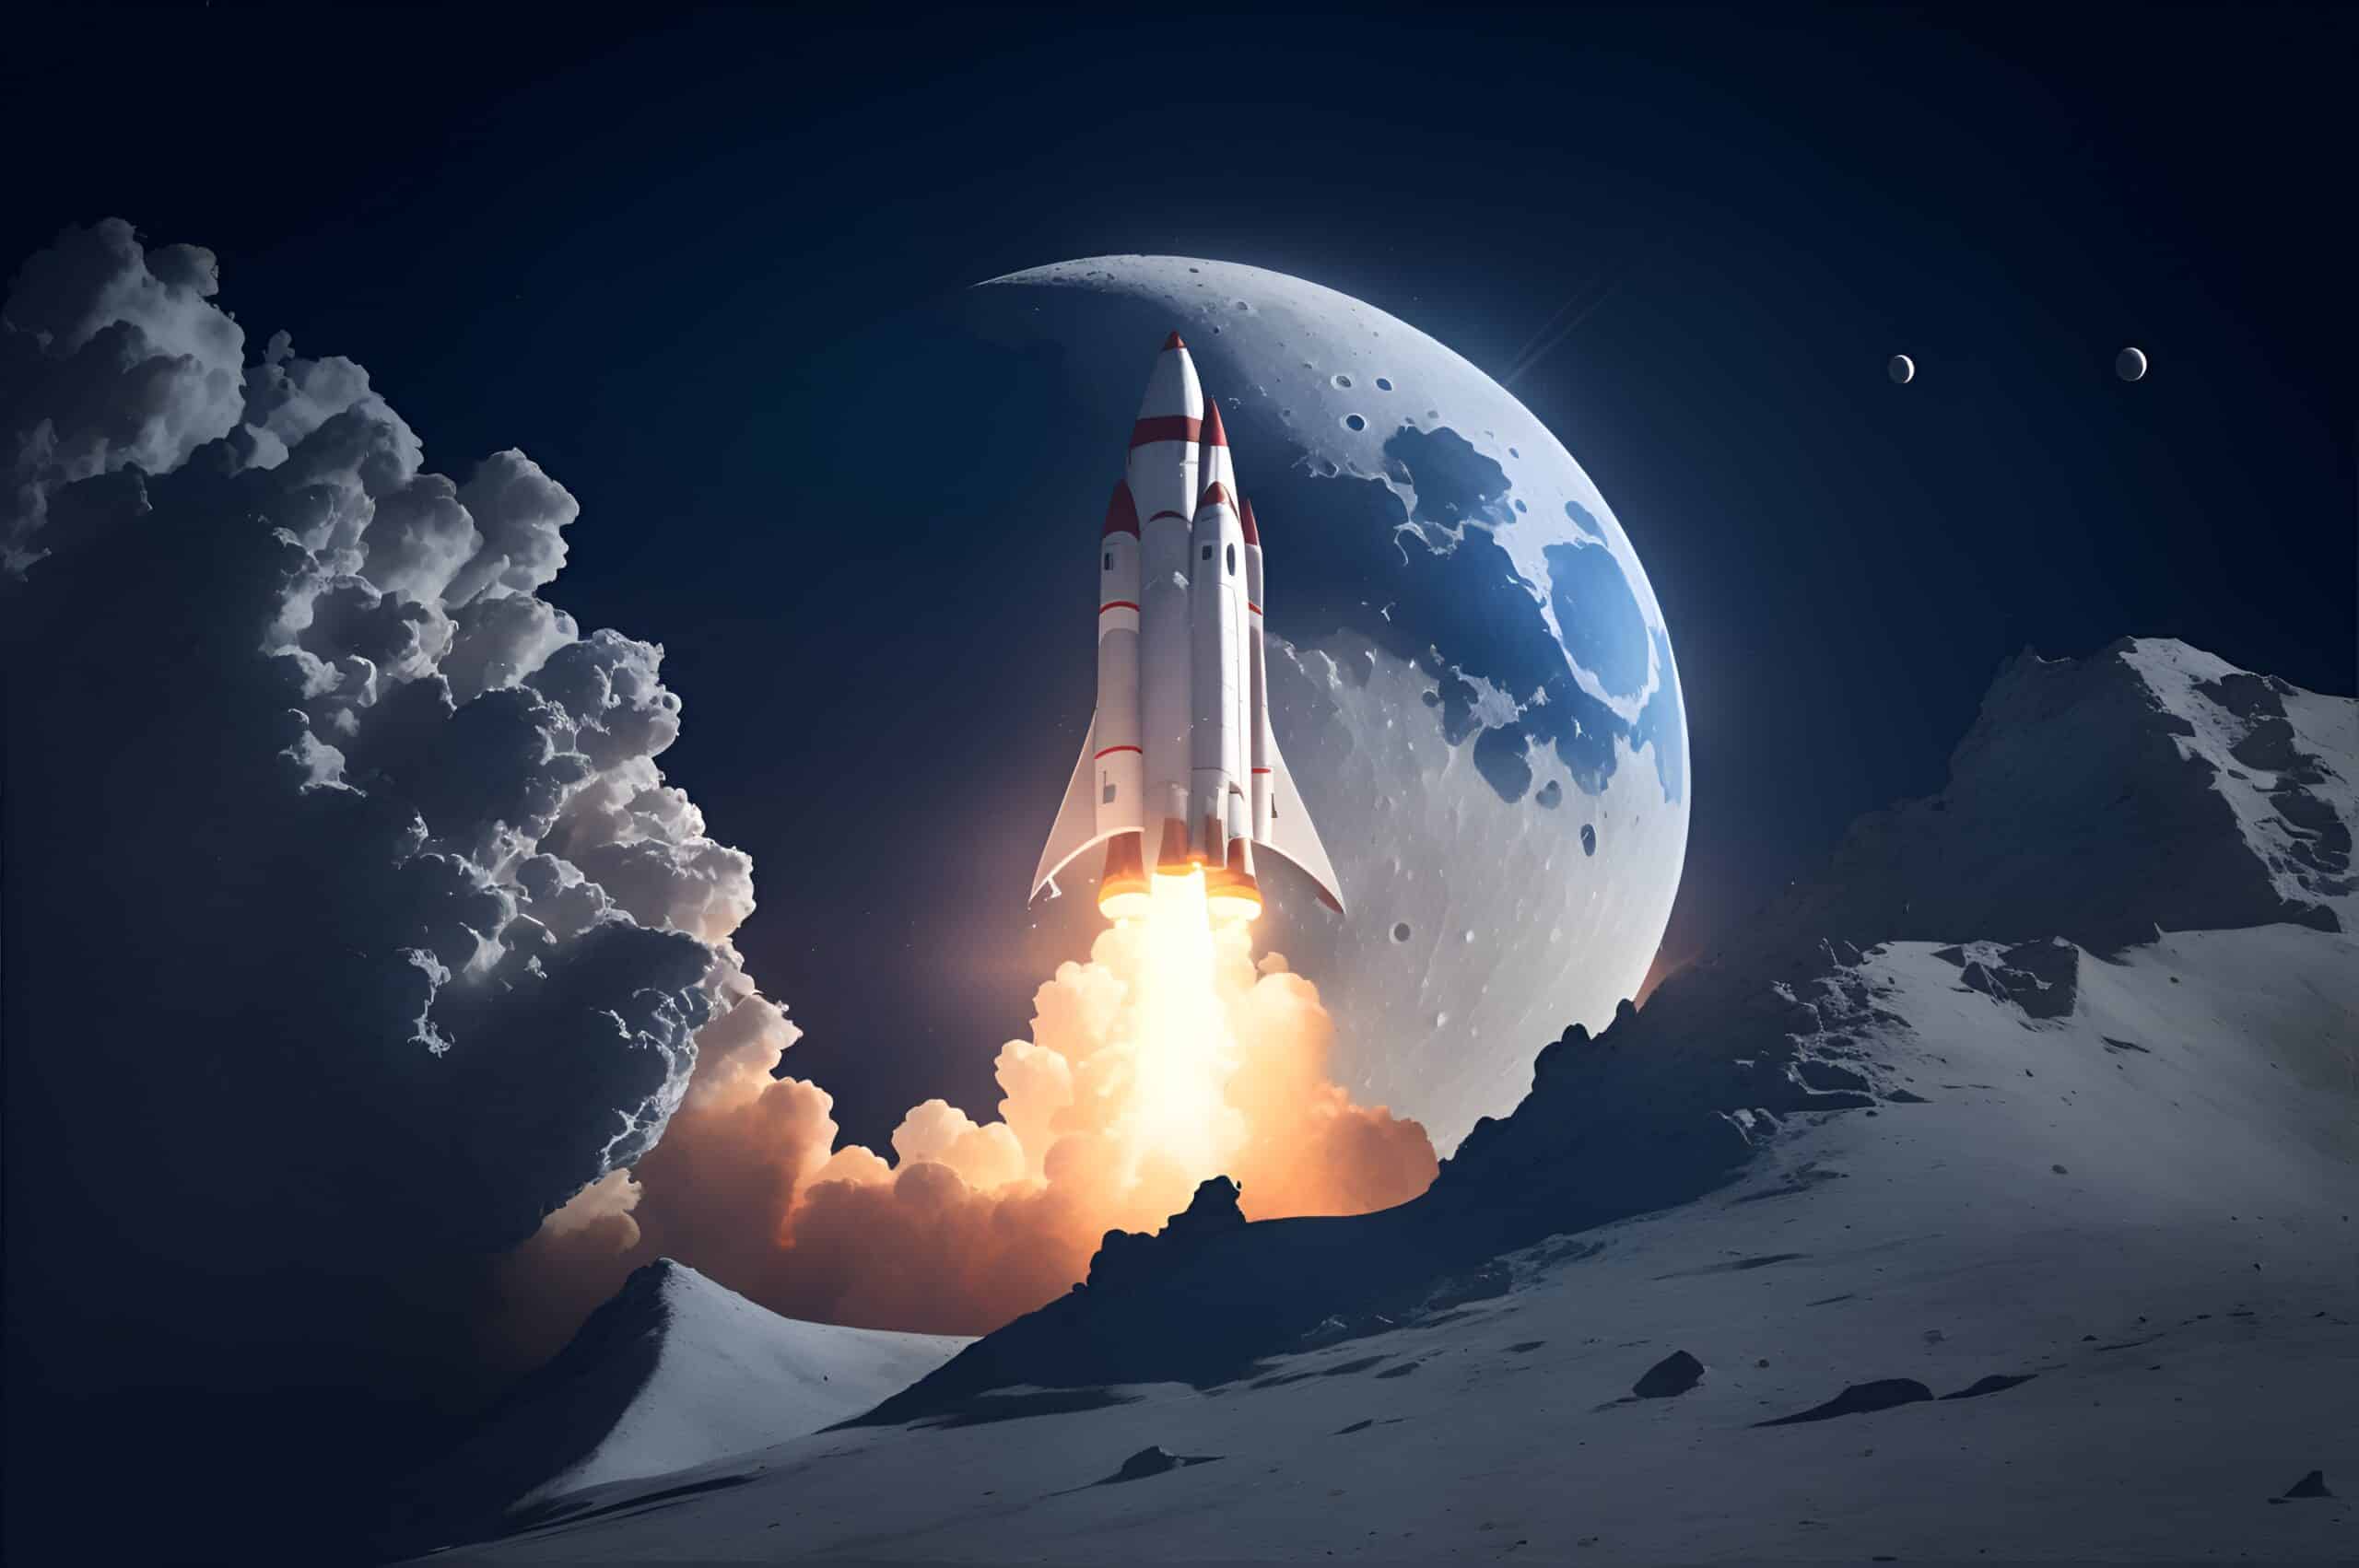 ai generated image of a rocket ship launching from behind some mountains with a giant moon behind it